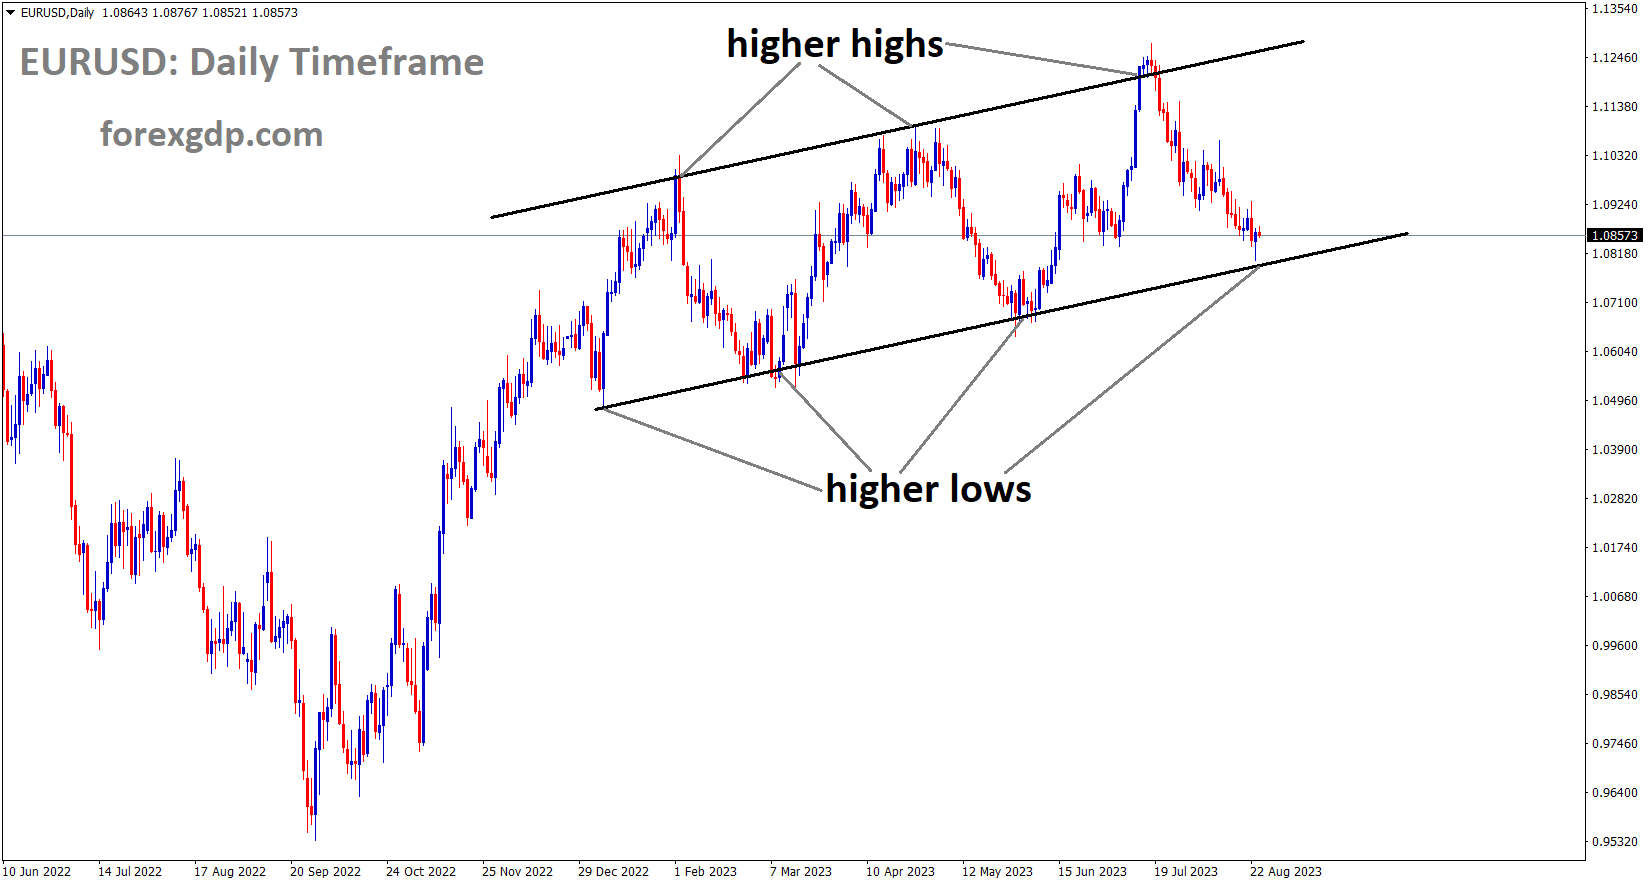 EURUSD is moving in an Ascending channel and the market has reached the higher low area of the channel